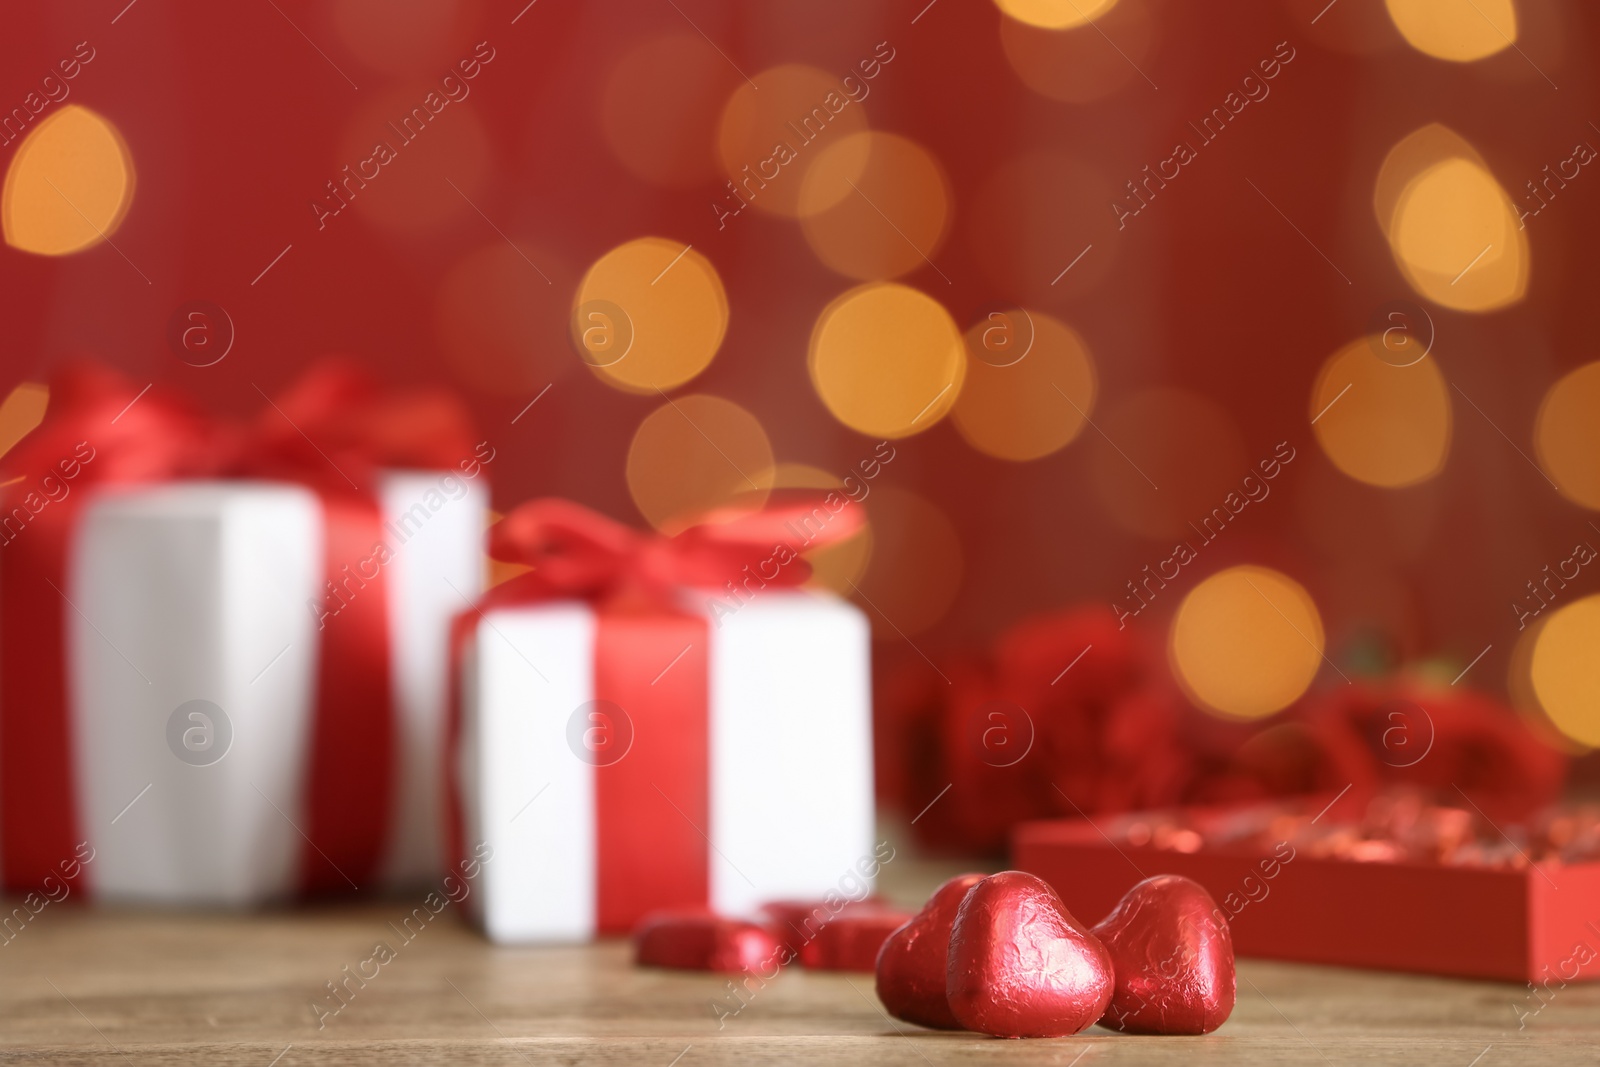 Photo of Heart shaped chocolate candies on table against blurred lights, space for text. Valentines's day celebration